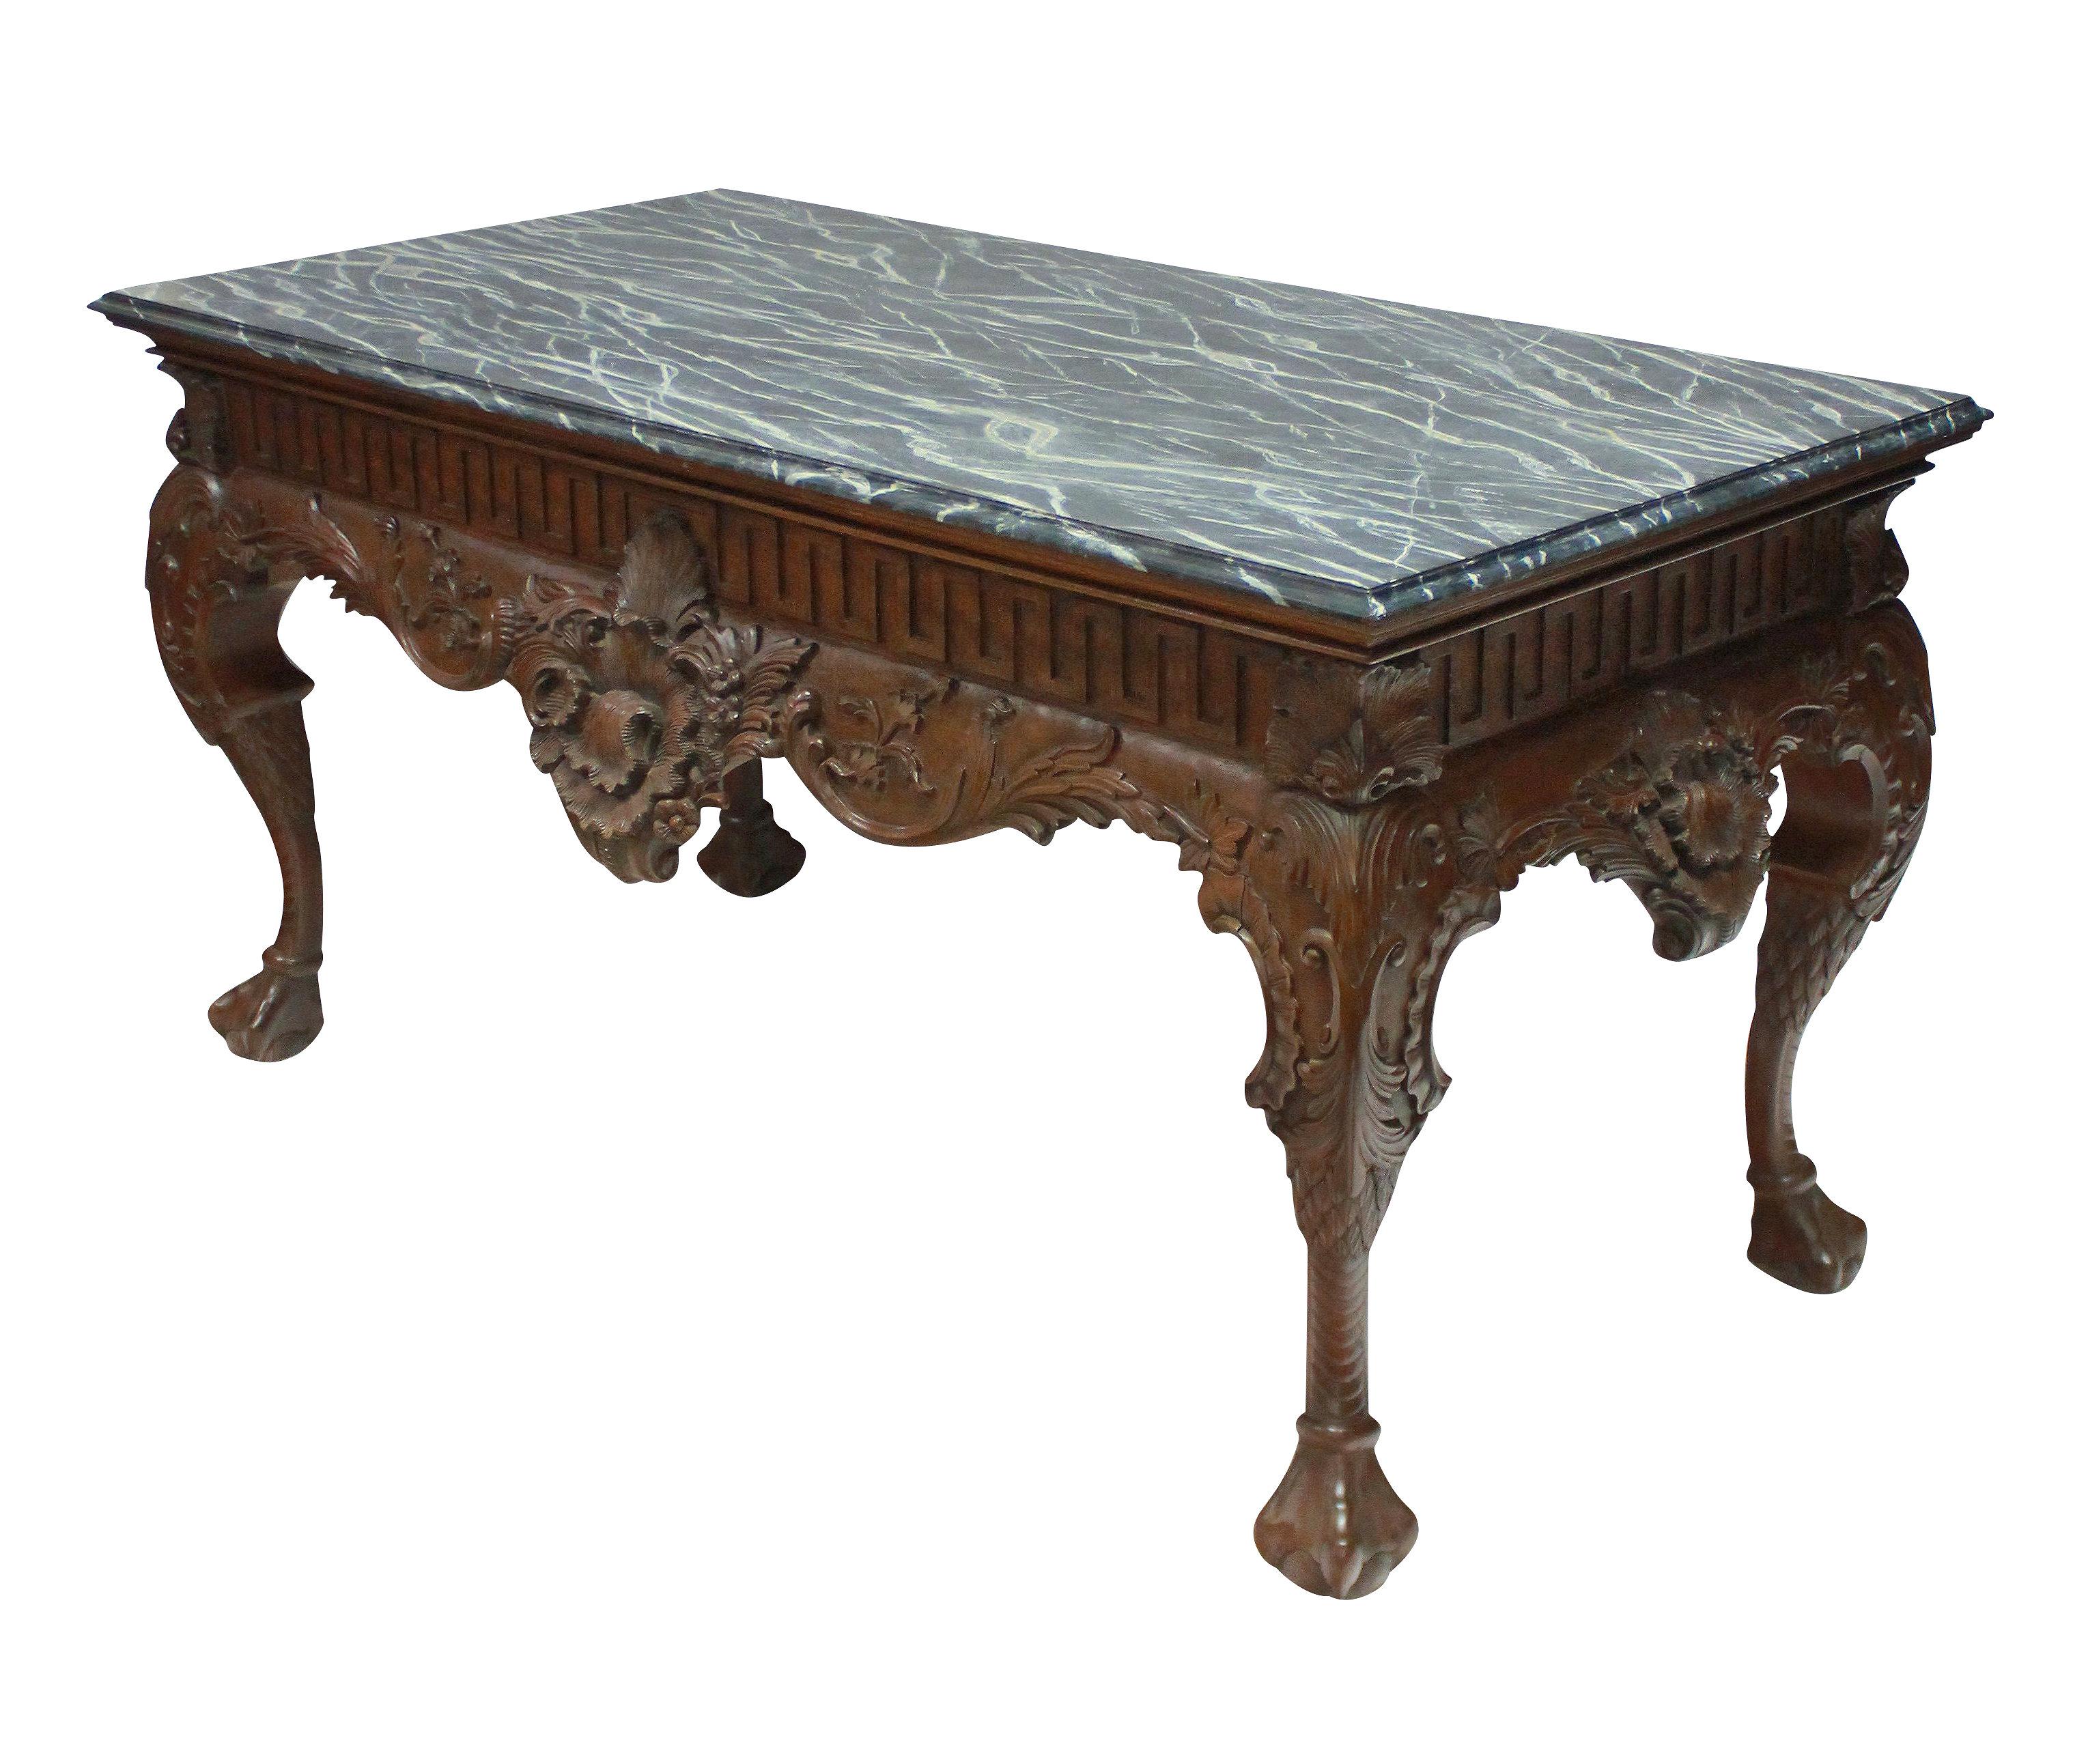 A large and beautifully carved George II Style mahogany centre table, with Greek key frieze and a grey variegated faux marble top. It is carved on all four sides, so could be used as a centre table, or sofa table/console.